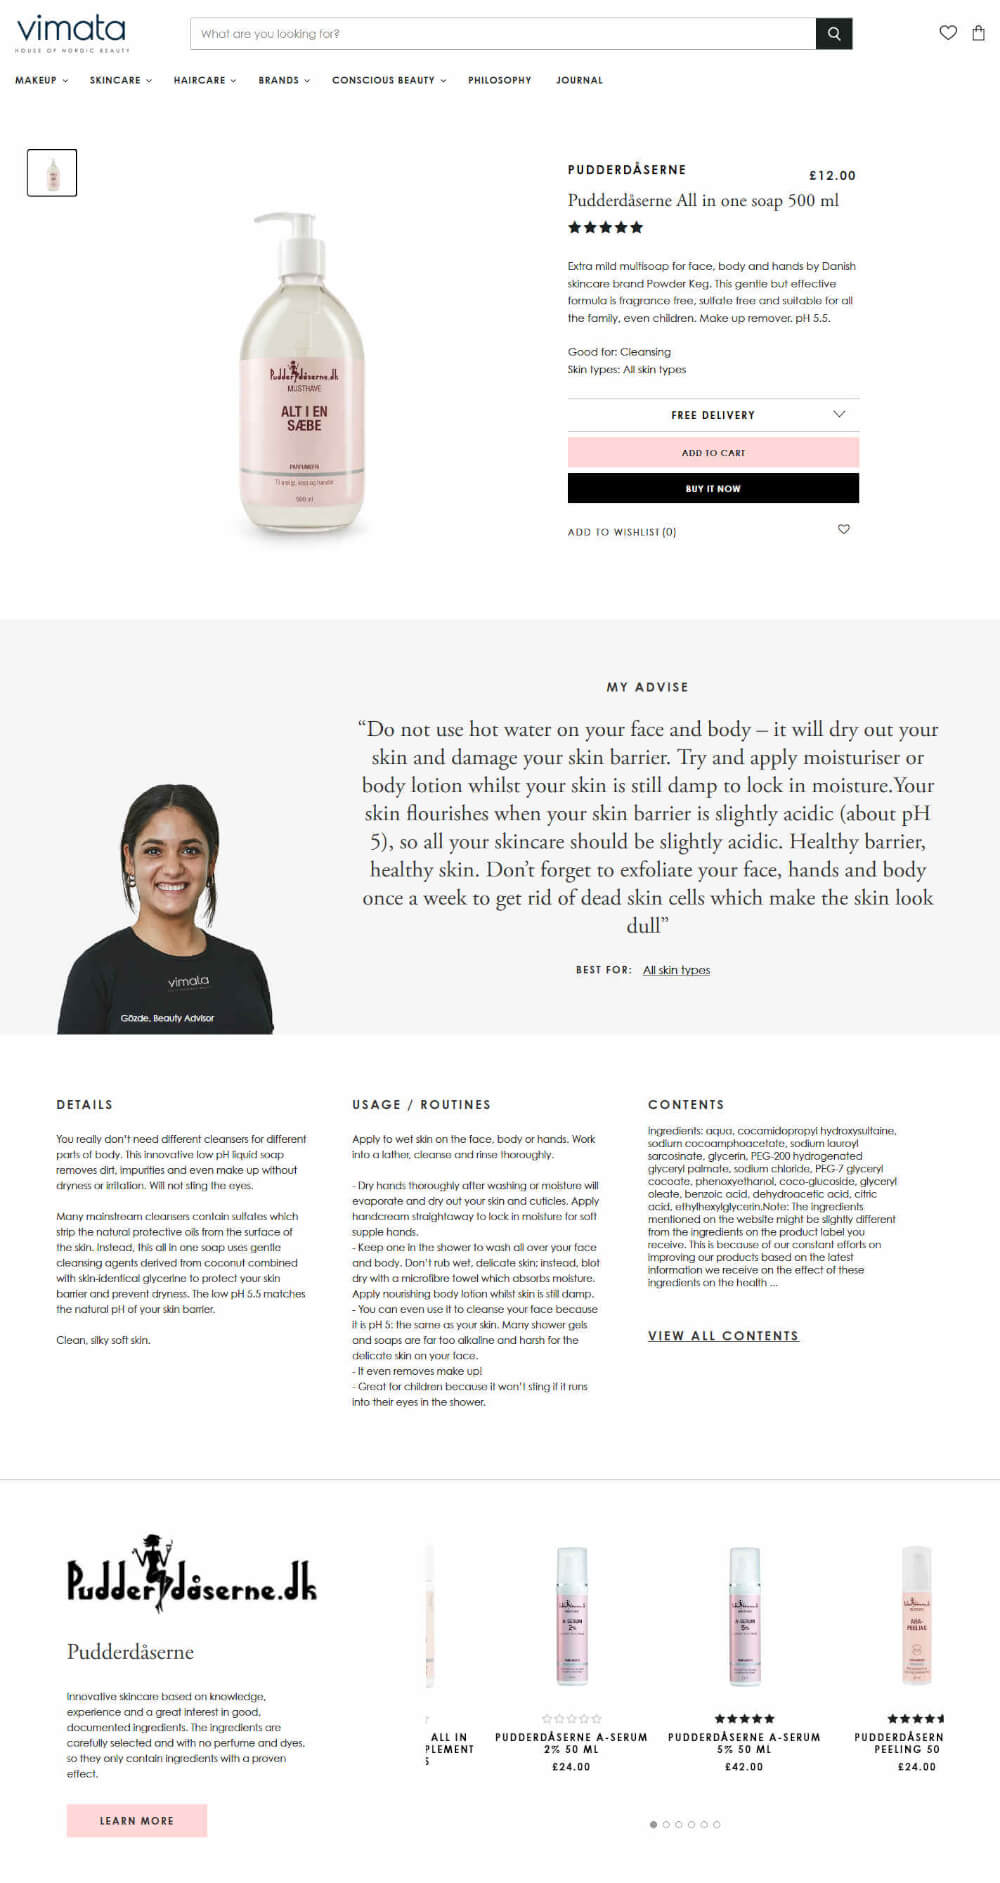 A product description screenshot for Vimata All-in-one soap